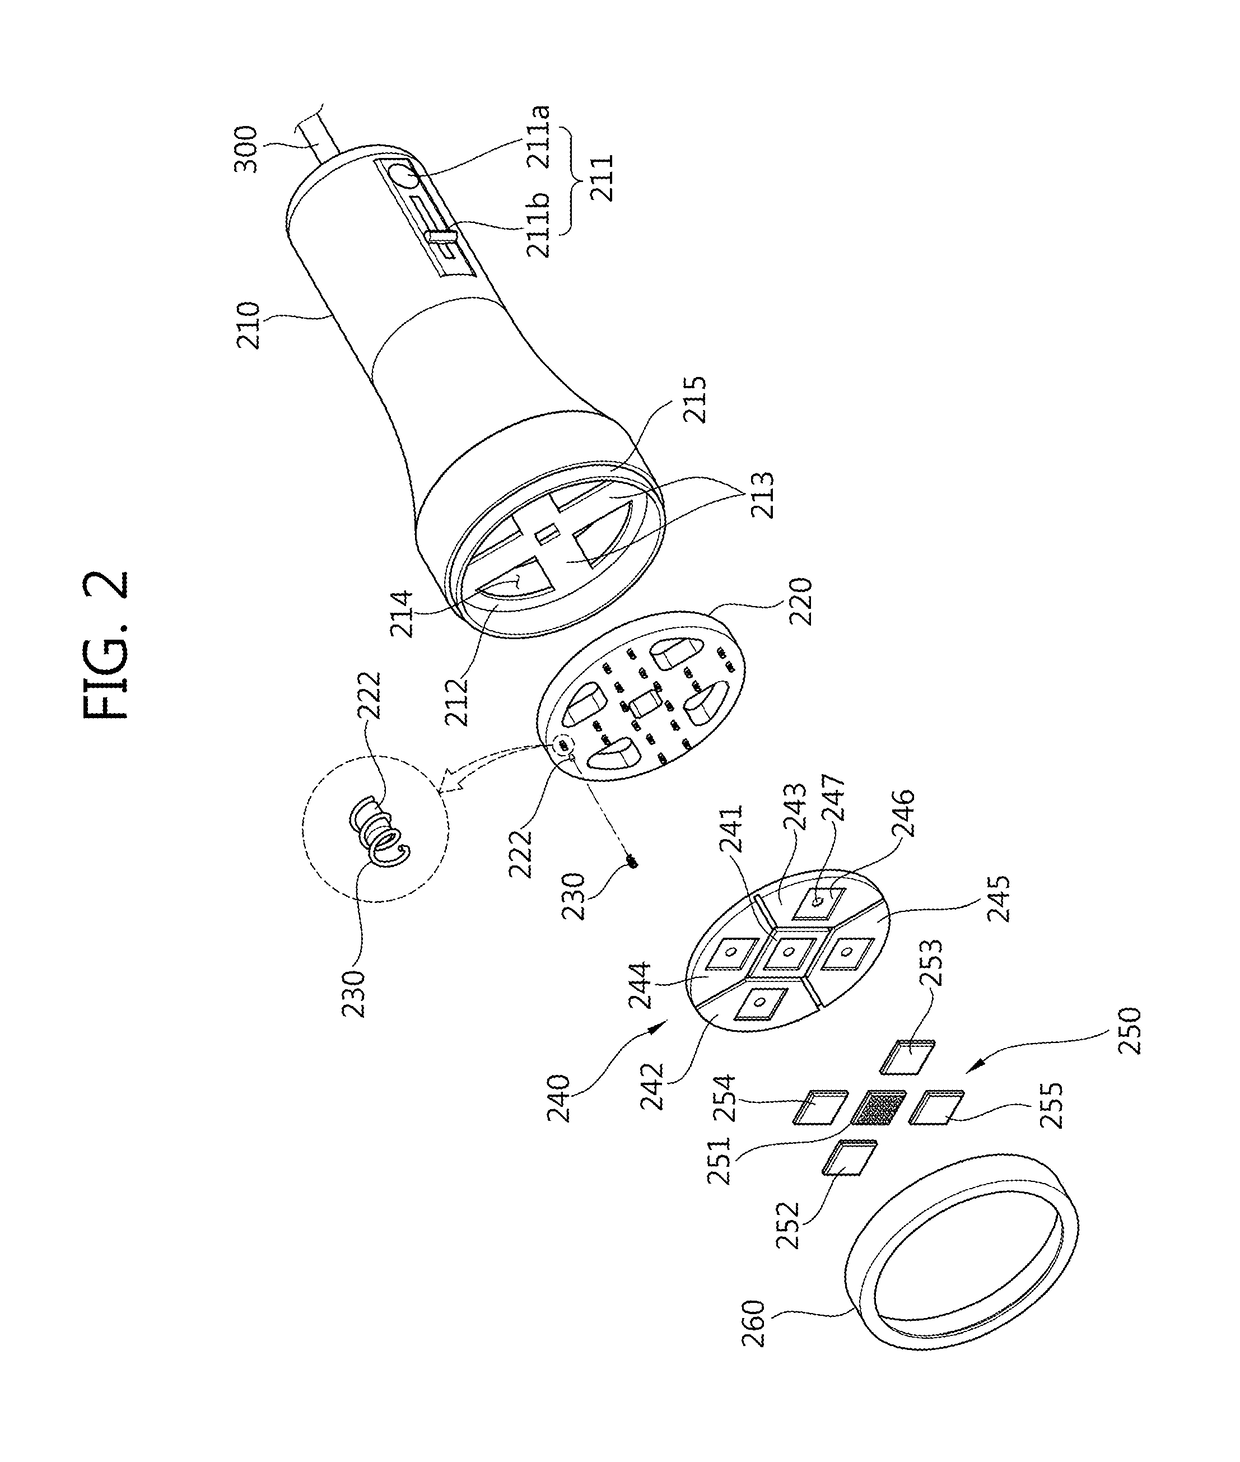 Treatment device using high frequency